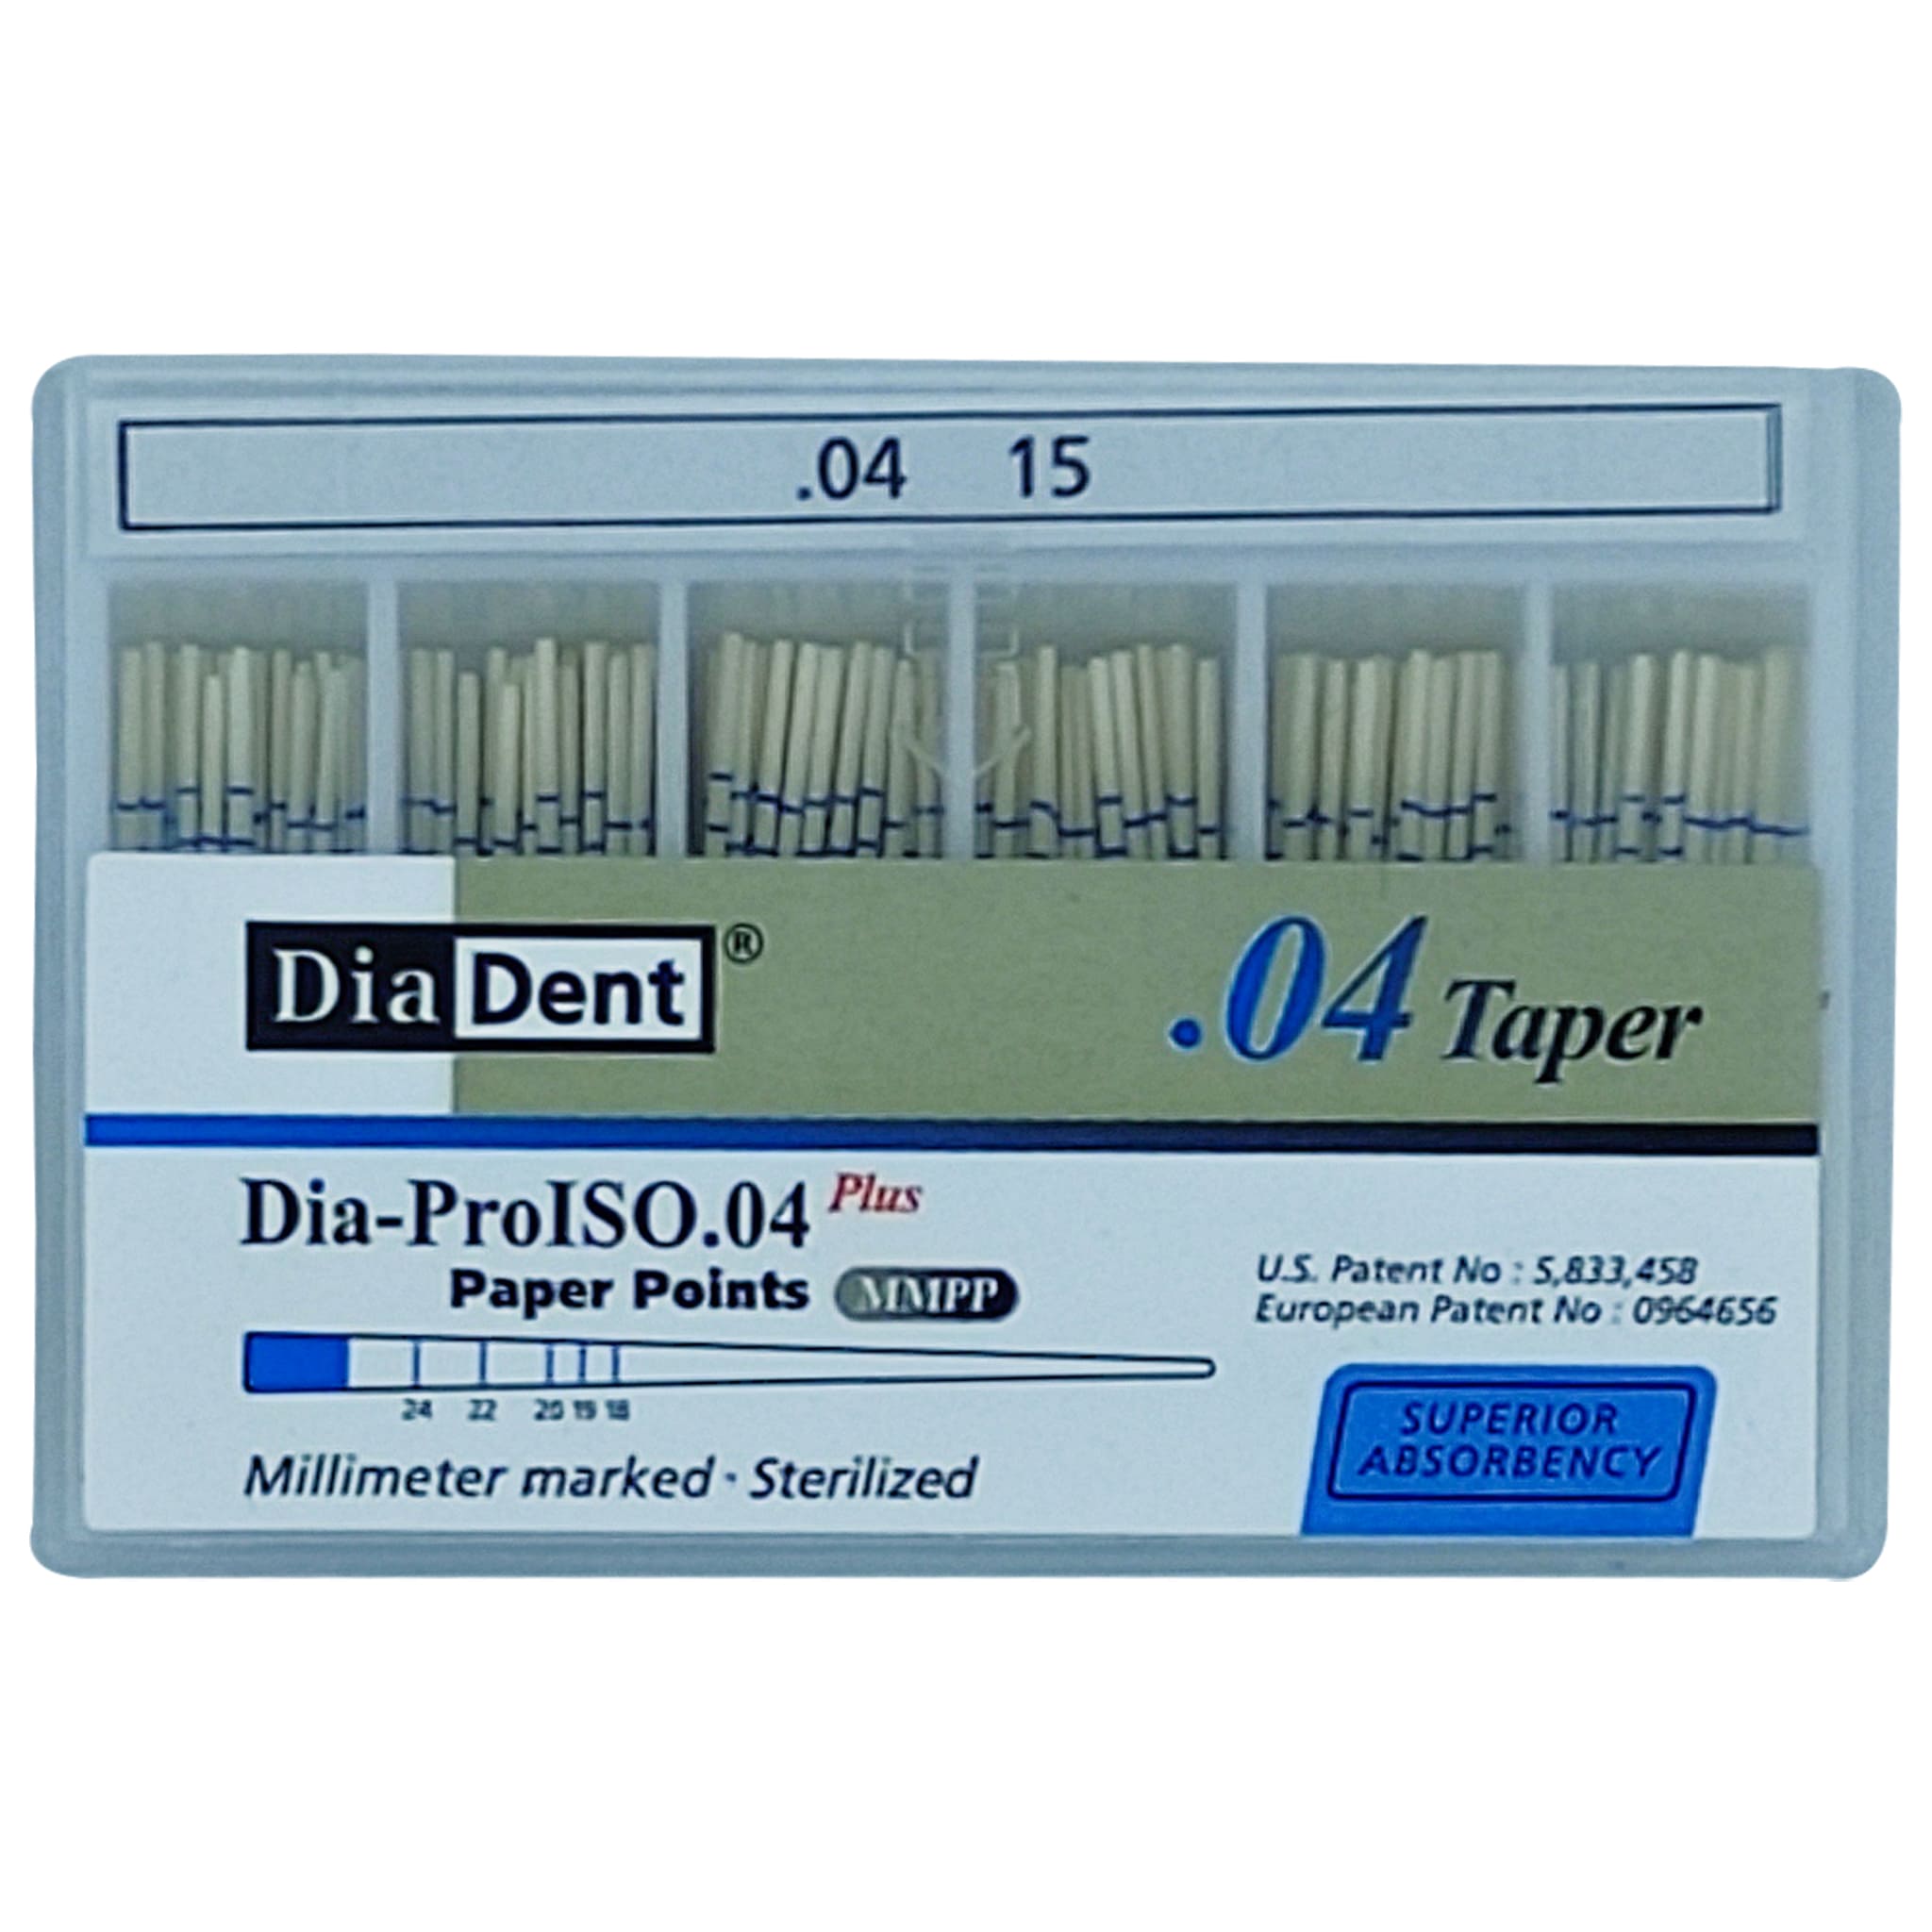 Diadent Paper Points 4% Dia-ProISO GT (mm-Marked) - (.04 Taper)